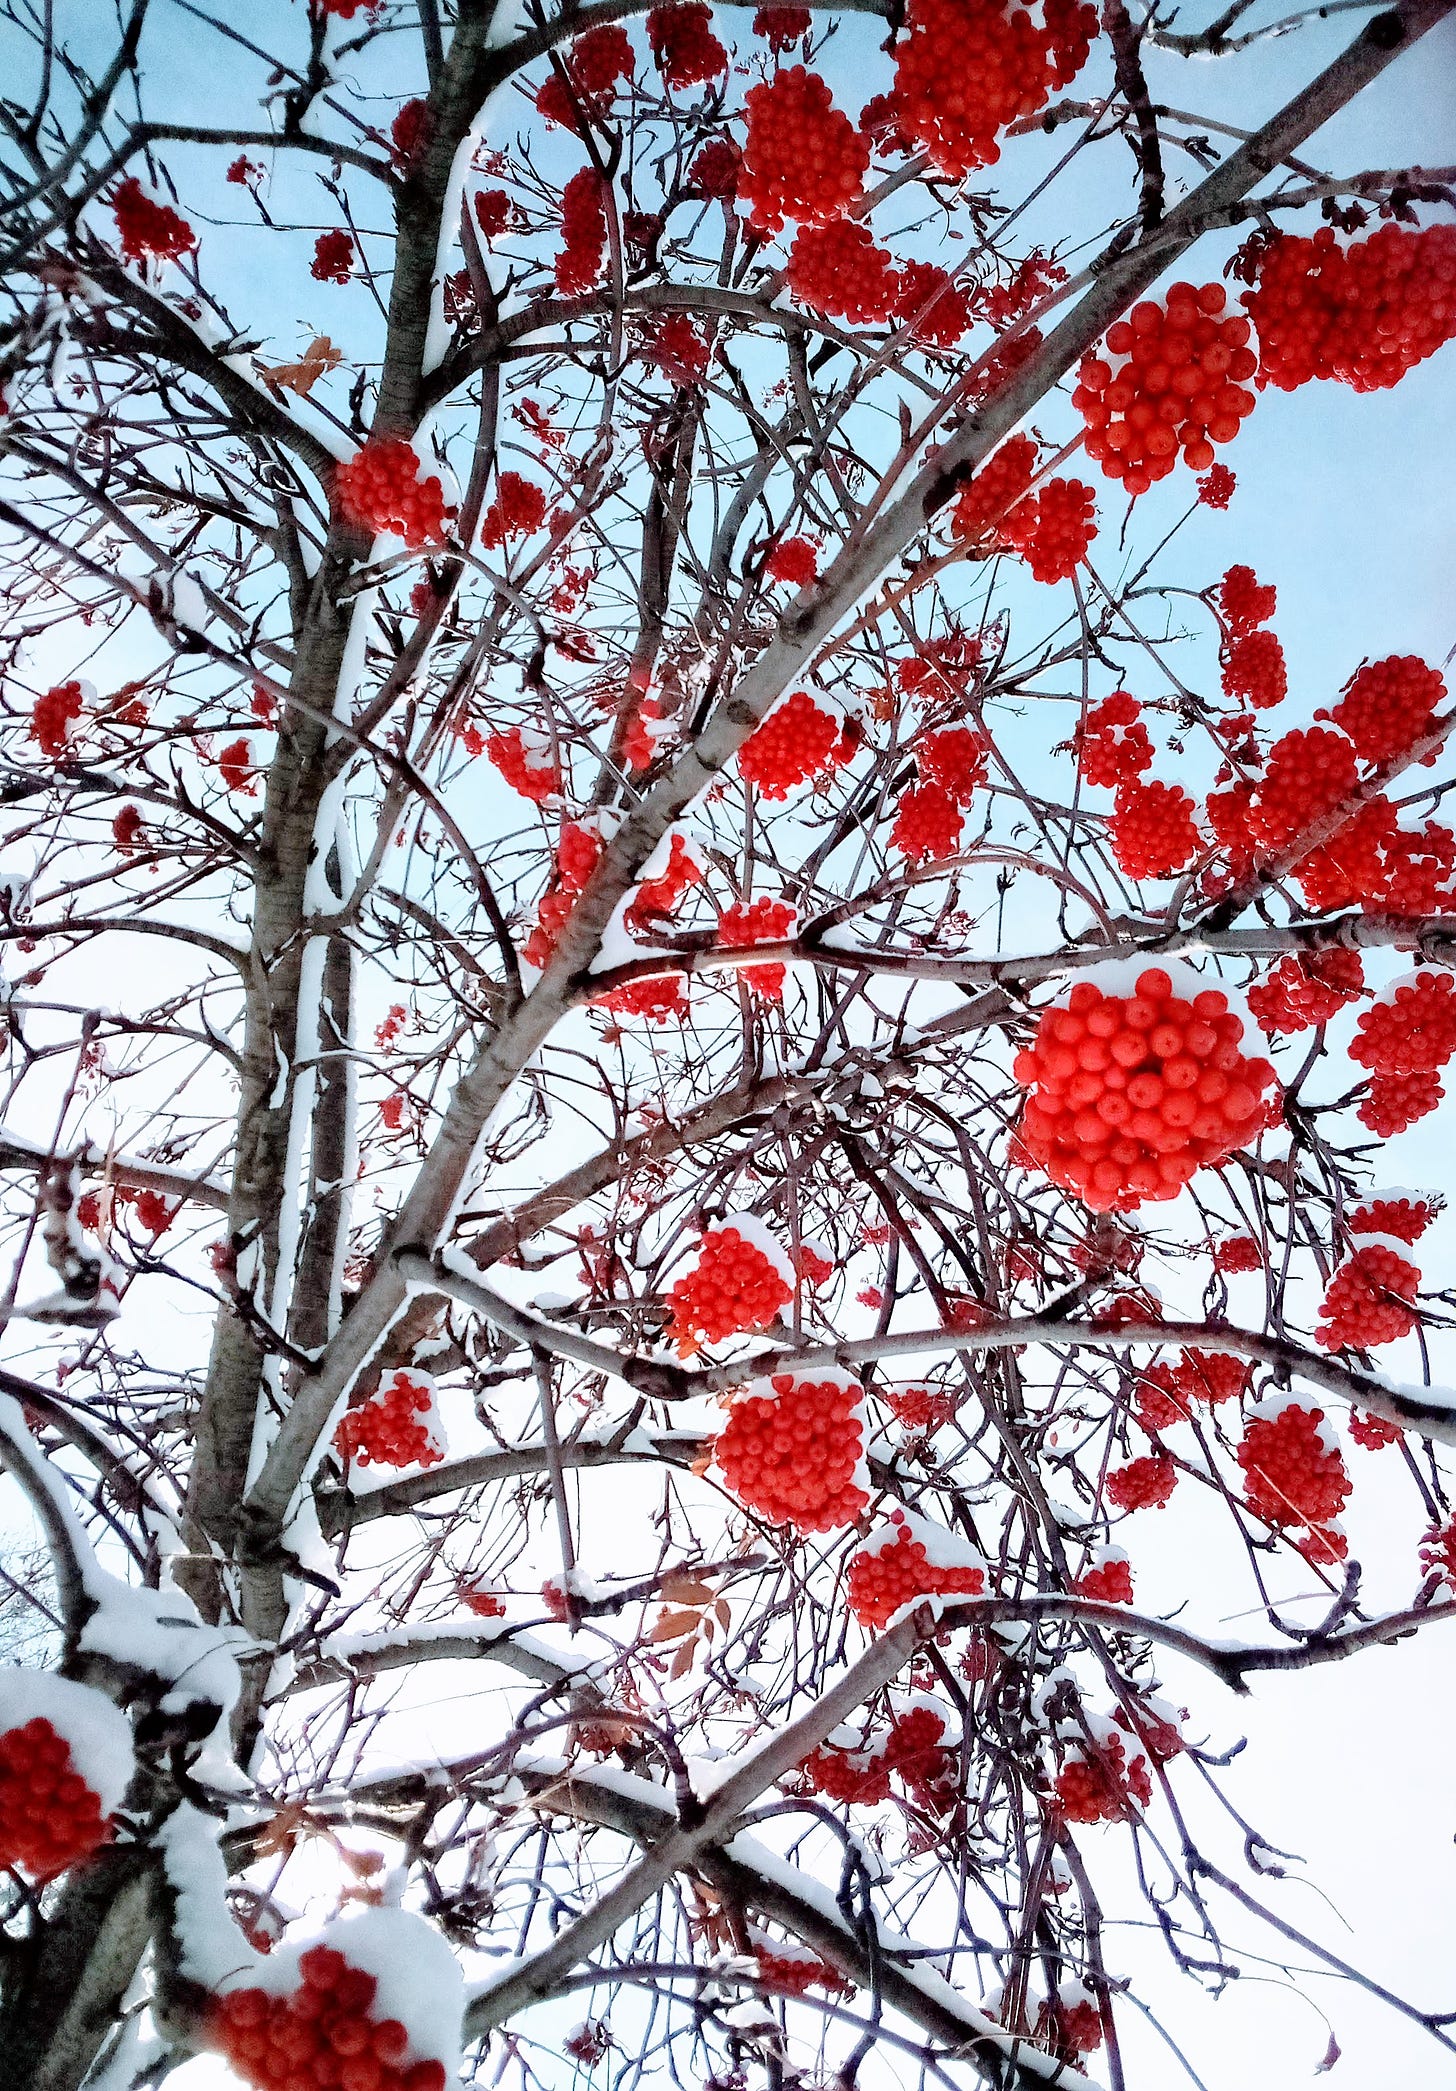 Bright red berries against a blue sky